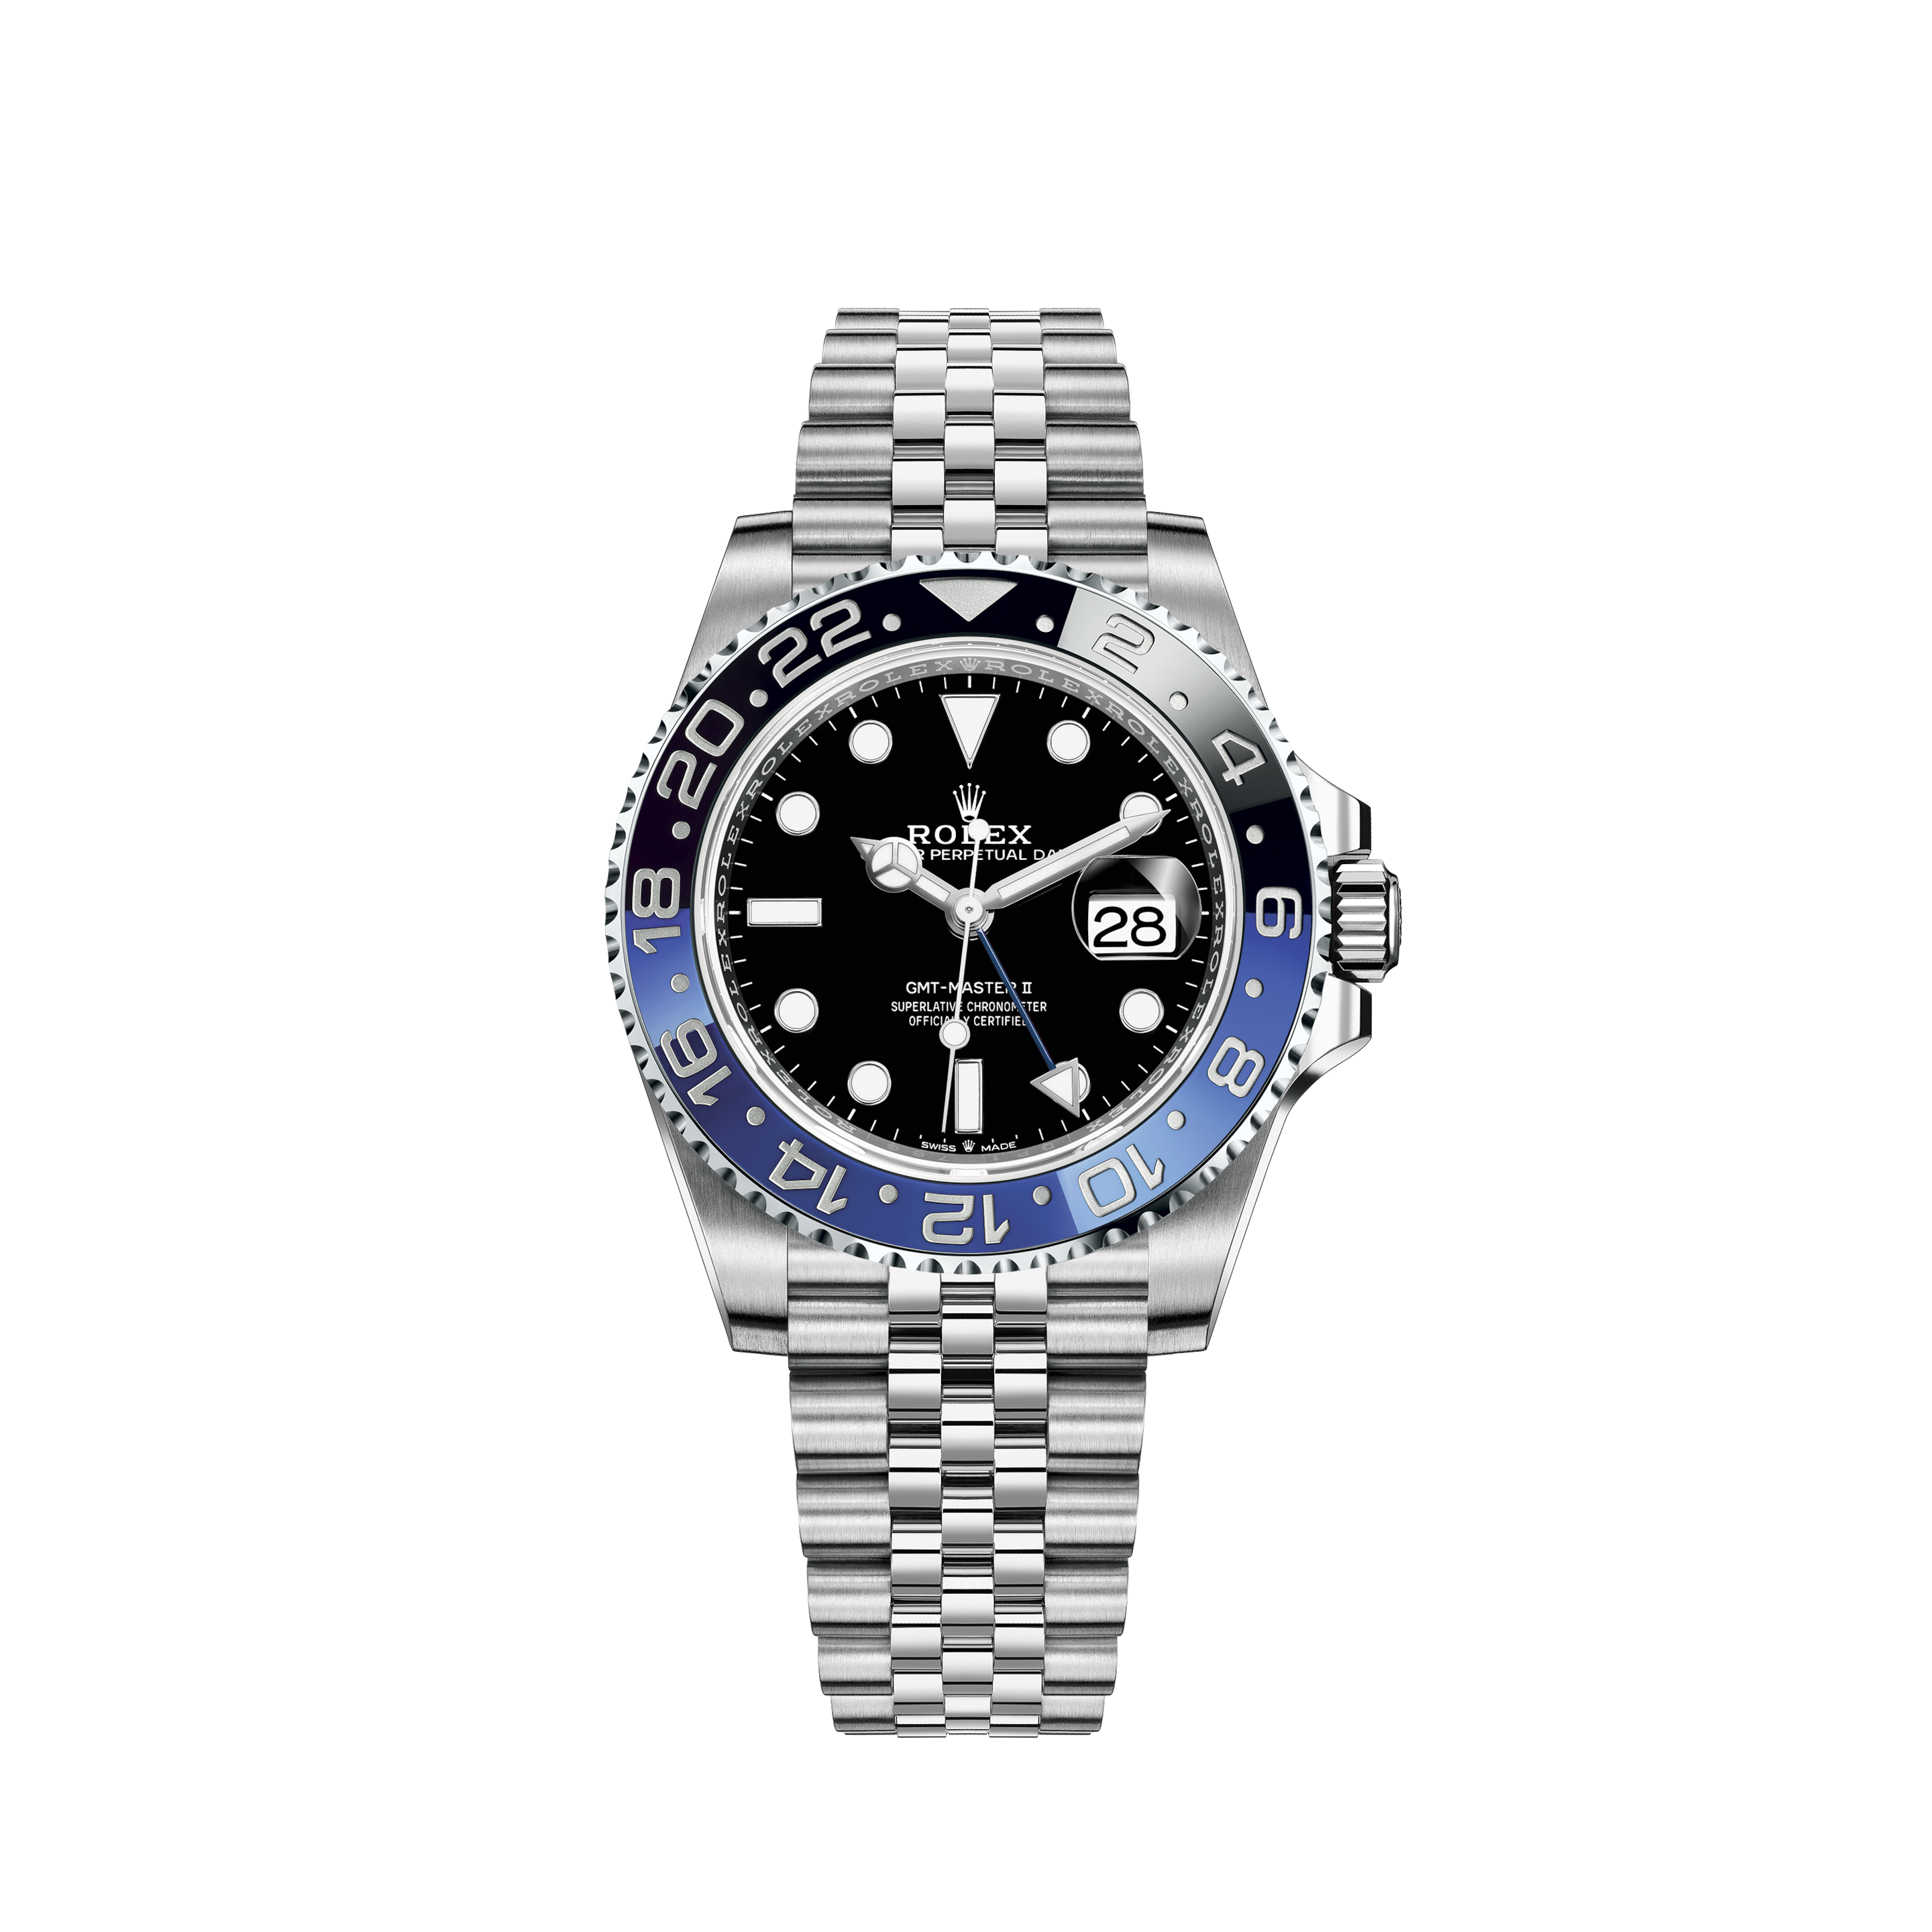 Rolex Sky Dweller White Dial Stainless Steel 326934 Custom Diamond Watch with Baguettes on the Bracelet